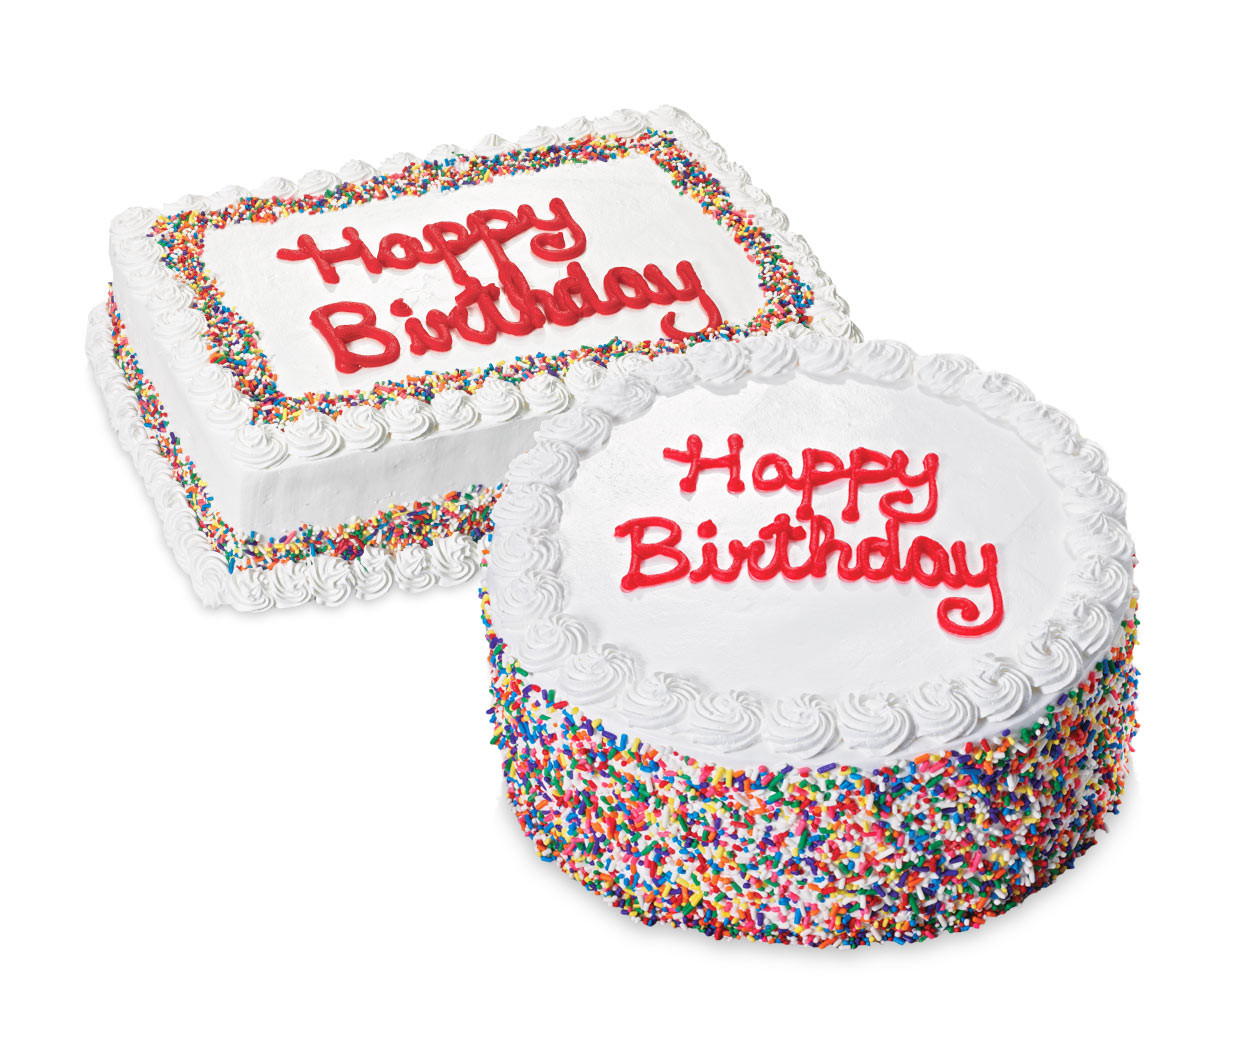 Cold Stone Birthday Cake
 Cakes made with your favorite Ice Cream at Cold Stone Creamery